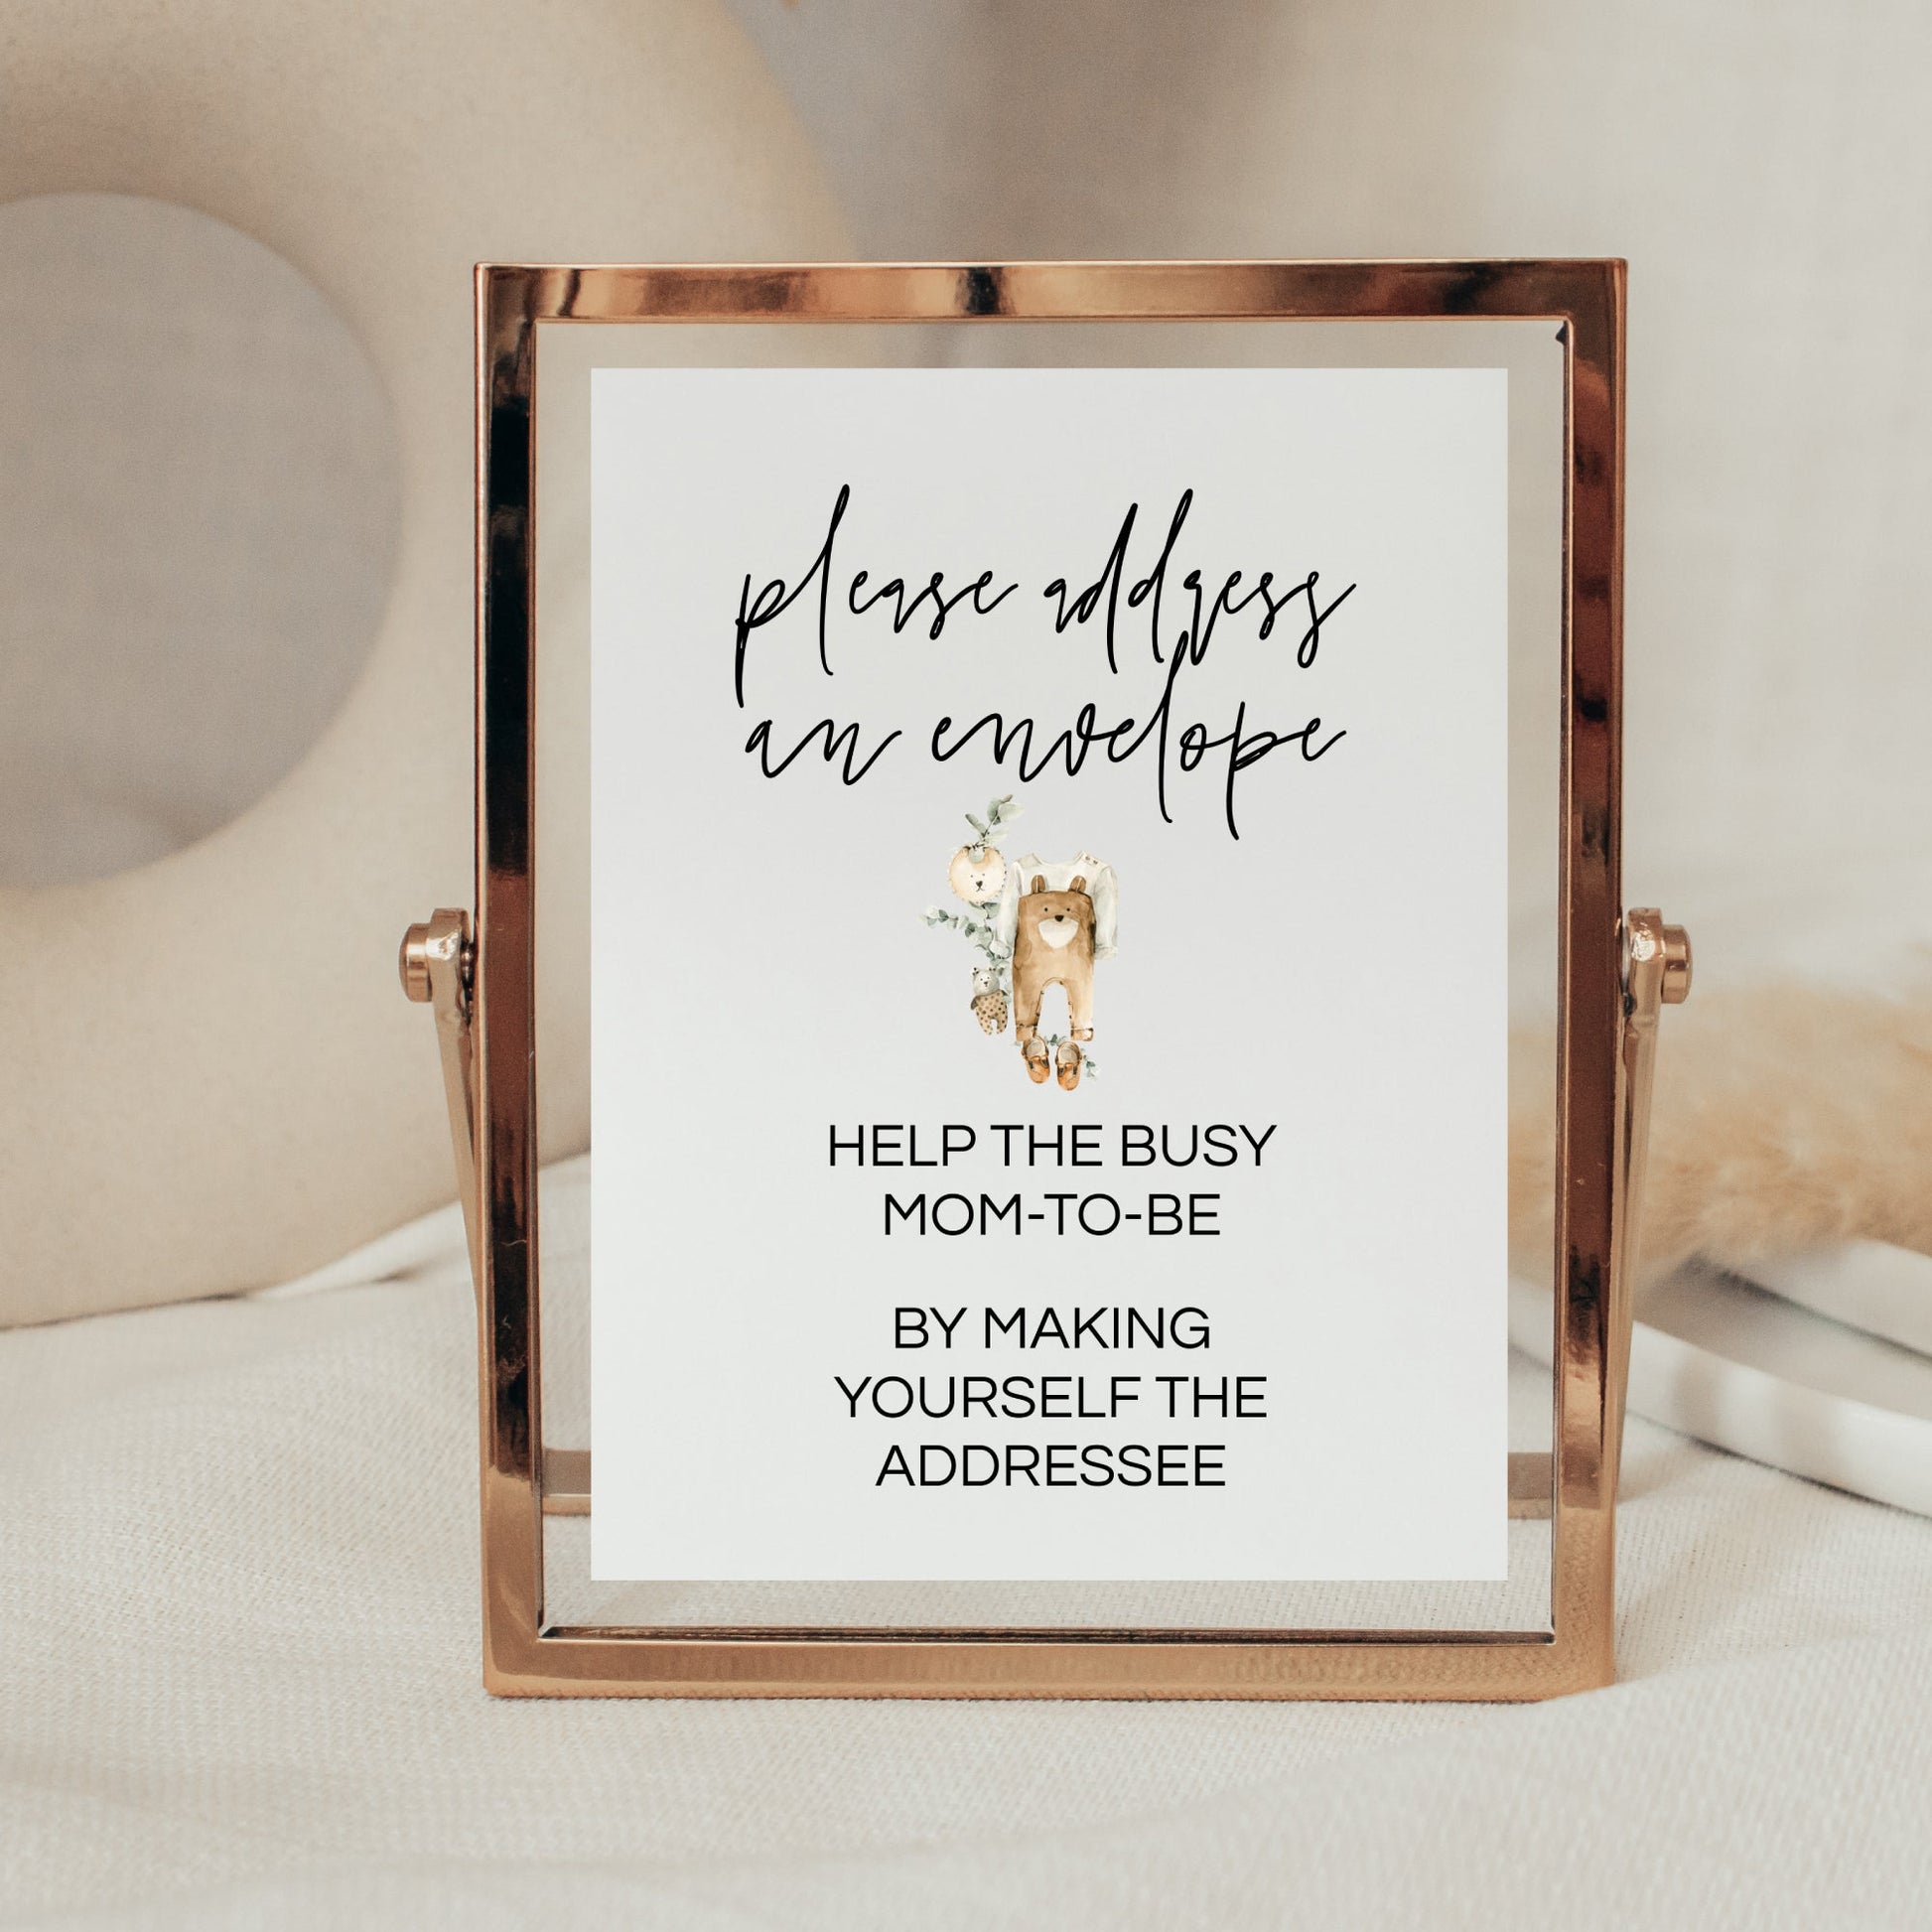 Printable Address Request Baby Shower Sign - Boho Teddy Bear Baby Clothes - 5x7" Editable - Print It Baby